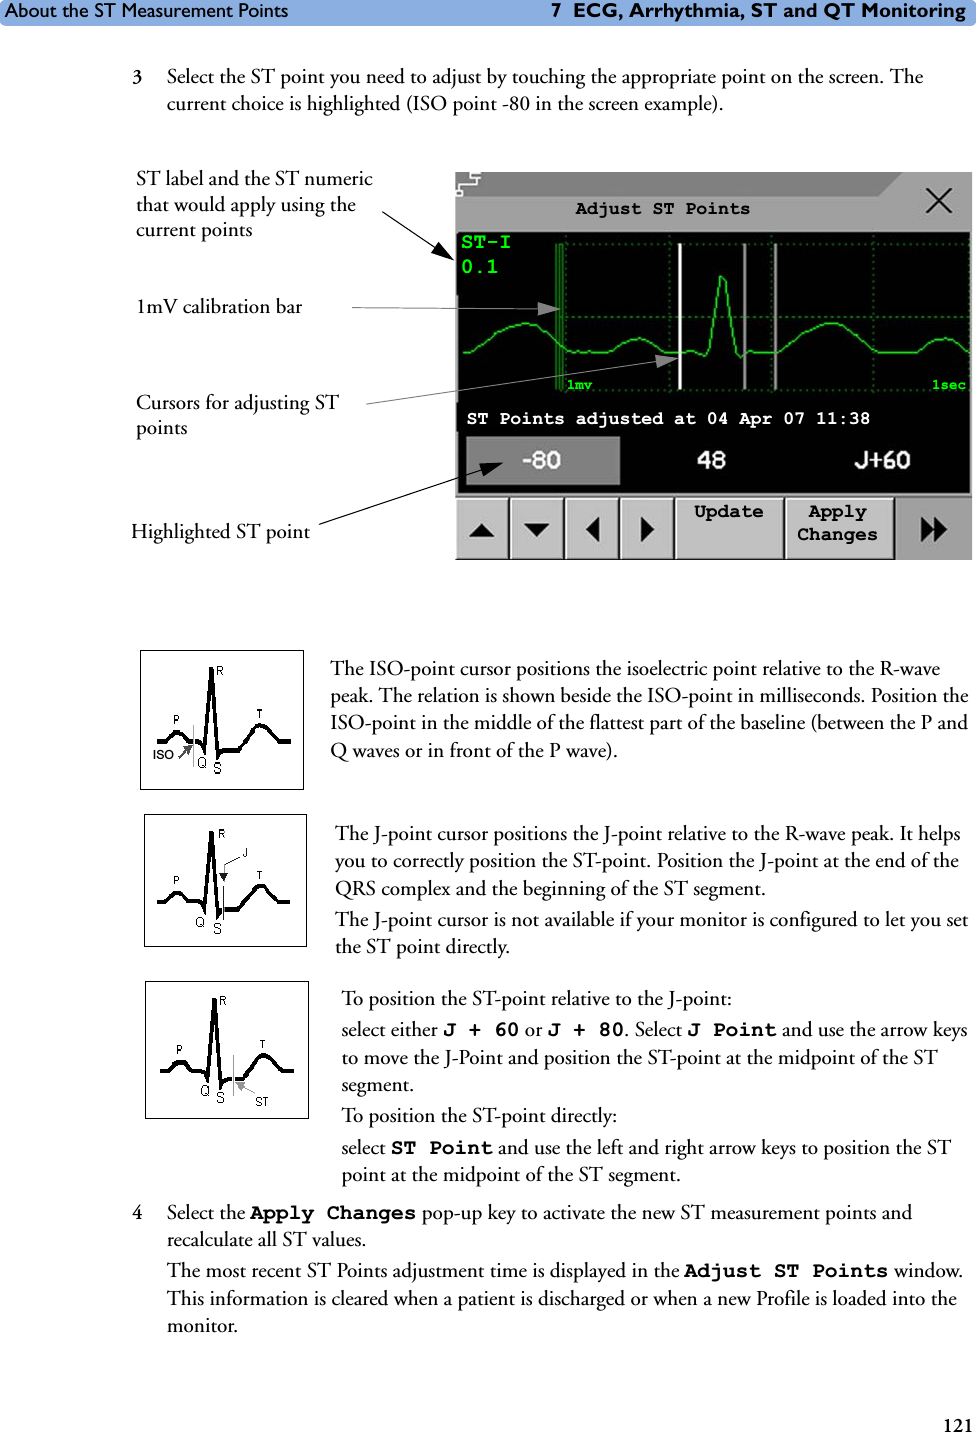 About the ST Measurement Points 7 ECG, Arrhythmia, ST and QT Monitoring1213Select the ST point you need to adjust by touching the appropriate point on the screen. The current choice is highlighted (ISO point -80 in the screen example).The ISO-point cursor positions the isoelectric point relative to the R-wave peak. The relation is shown beside the ISO-point in milliseconds. Position the ISO-point in the middle of the flattest part of the baseline (between the P and Q waves or in front of the P wave). The J-point cursor positions the J-point relative to the R-wave peak. It helps you to correctly position the ST-point. Position the J-point at the end of the QRS complex and the beginning of the ST segment. The J-point cursor is not available if your monitor is configured to let you set the ST point directly. To position the ST-point relative to the J-point:select either J+60 or J+80. Select J Point and use the arrow keys to move the J-Point and position the ST-point at the midpoint of the ST segment. To position the ST-point directly: select ST Point and use the left and right arrow keys to position the ST point at the midpoint of the ST segment.4Select the Apply Changes pop-up key to activate the new ST measurement points and recalculate all ST values.The most recent ST Points adjustment time is displayed in the Adjust ST Points window. This information is cleared when a patient is discharged or when a new Profile is loaded into the monitor. 1mV calibration barHighlighted ST pointST label and the ST numeric that would apply using the current pointsCursors for adjusting ST pointsAdjust ST PointsST-I0.1Update Apply Changes1mv 1secST Points adjusted at 04 Apr 07 11:38ISO